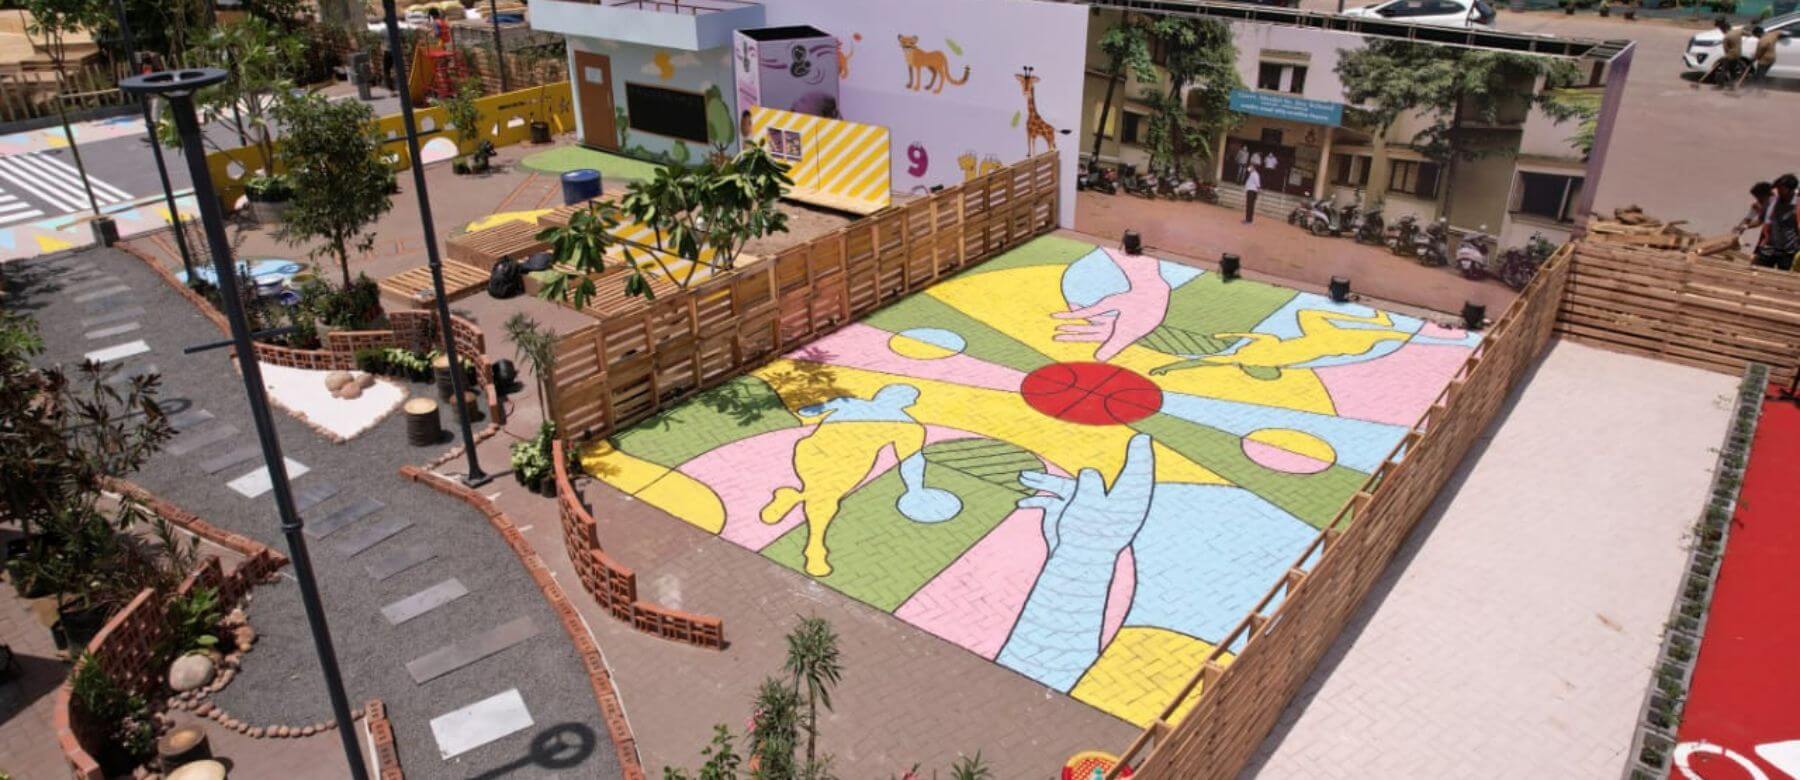 Anganwadi and primary school play spaces segregated as per age specific needs for play